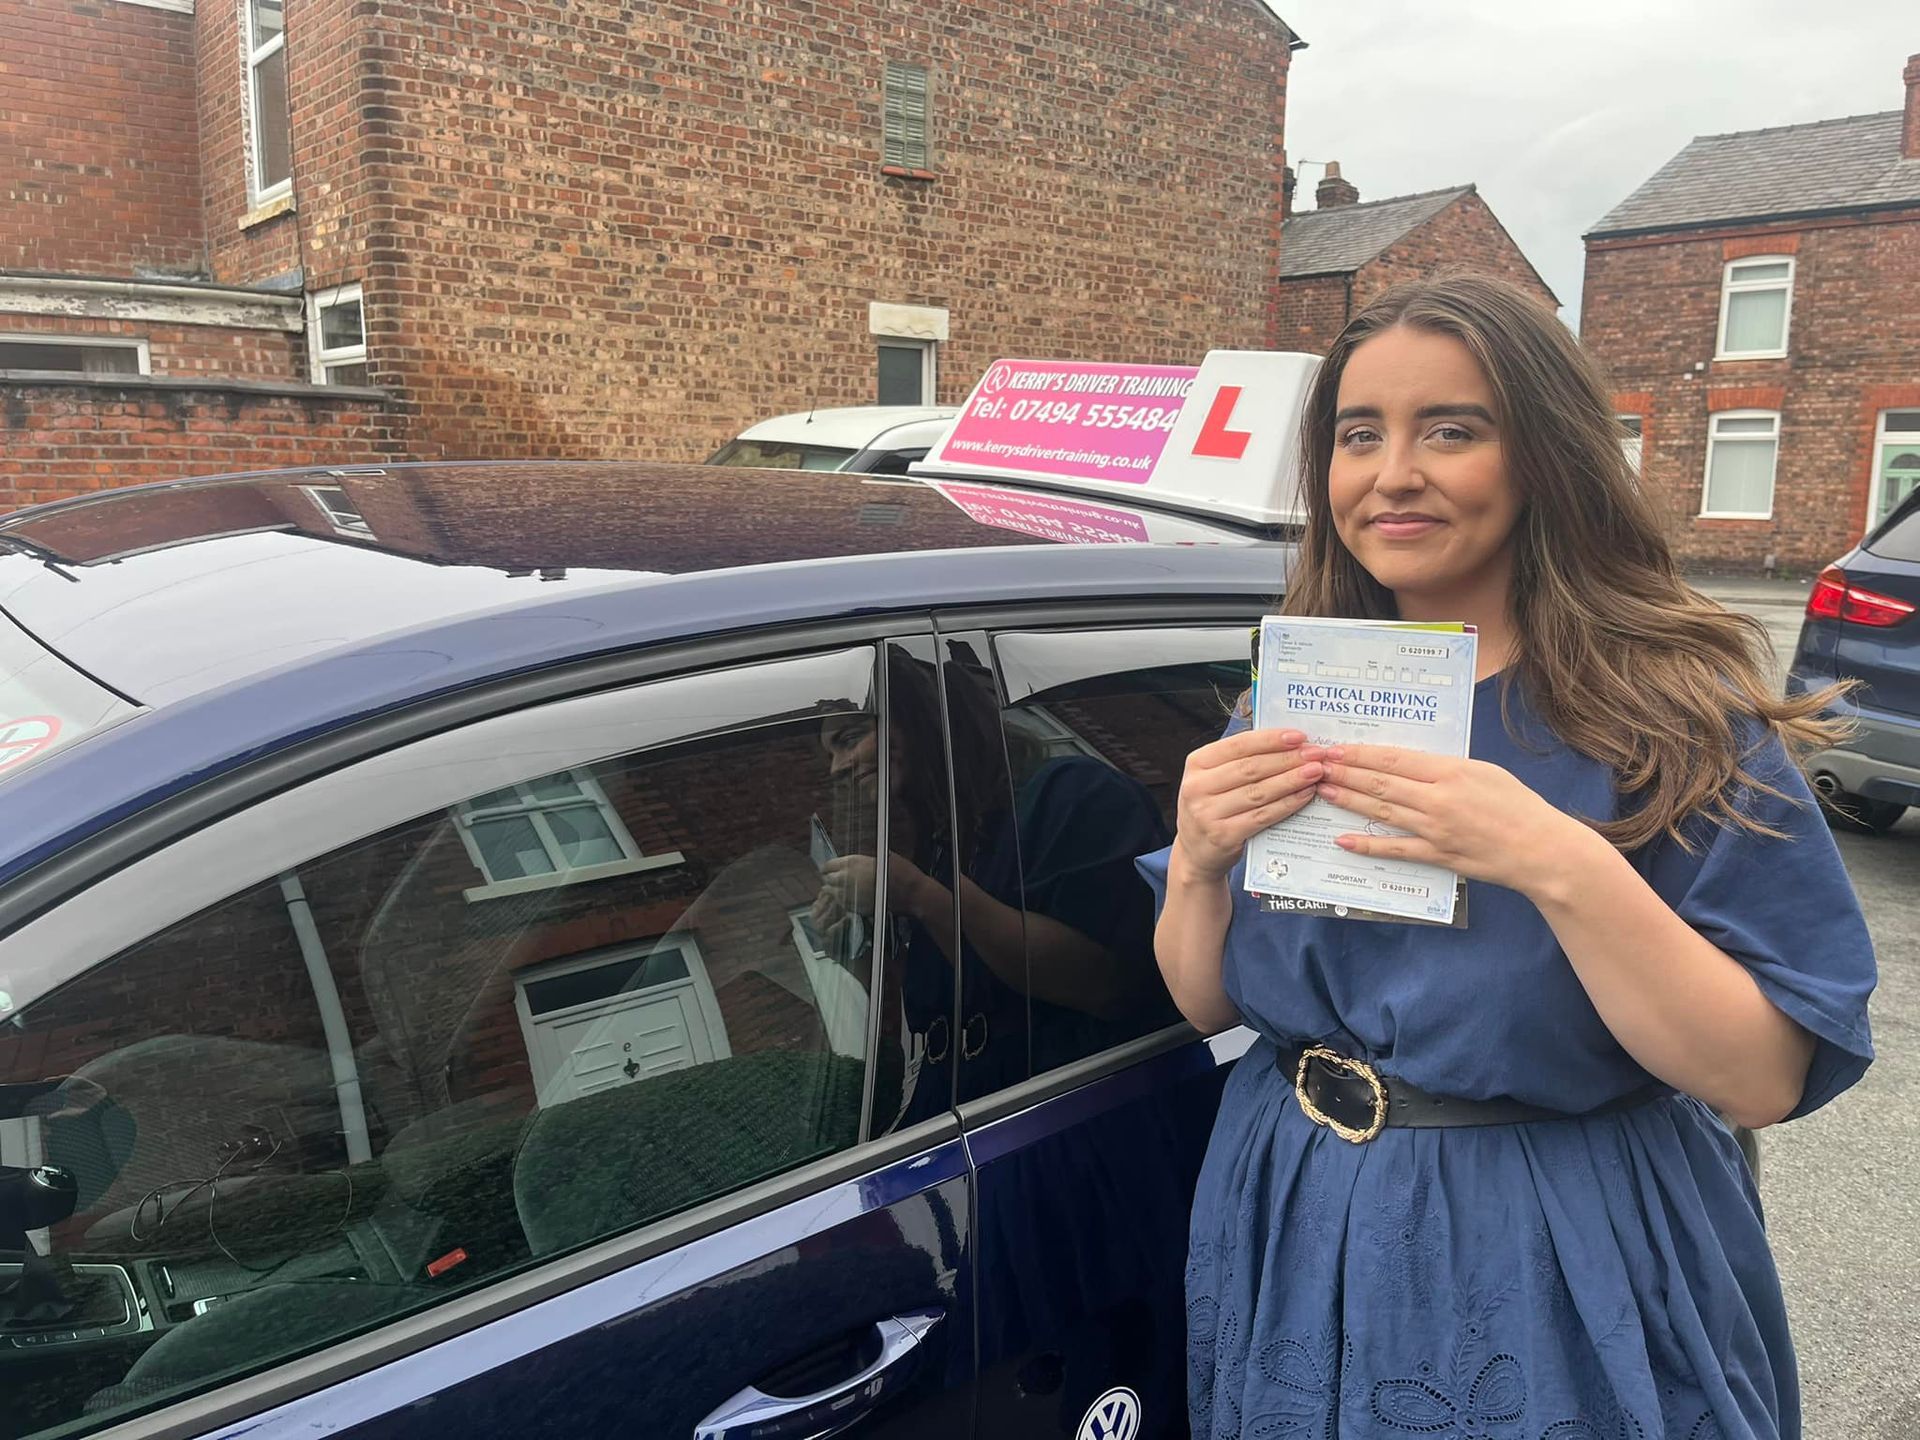 a woman in a blue dress is standing in front of a car holding a certificate .